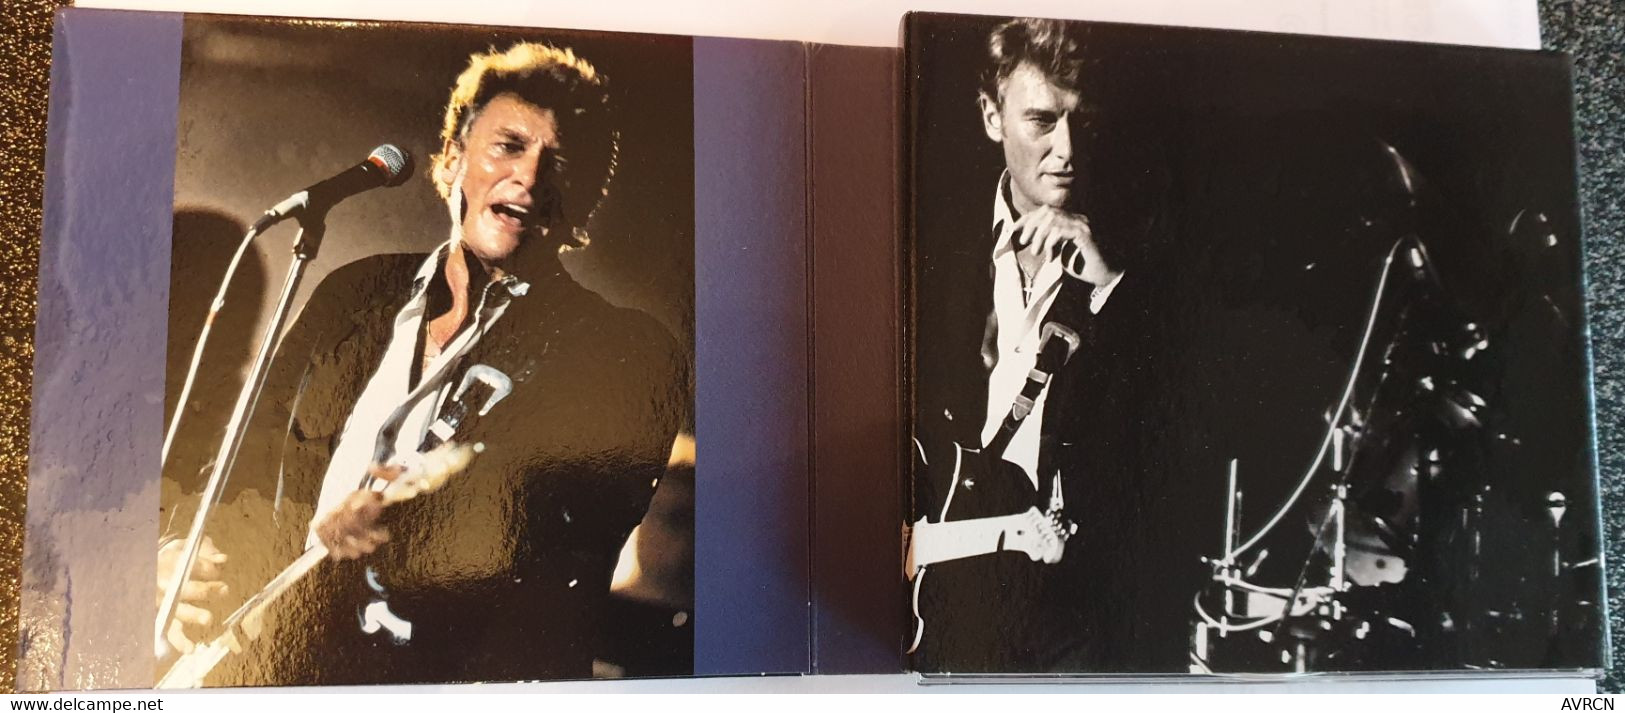 JOHNNY HALLYDAY LIVE AT MONTREUX 1988 . ALBUM DOUBLE CD + 1 DVD..Eagle EAGDV095 - Music On DVD